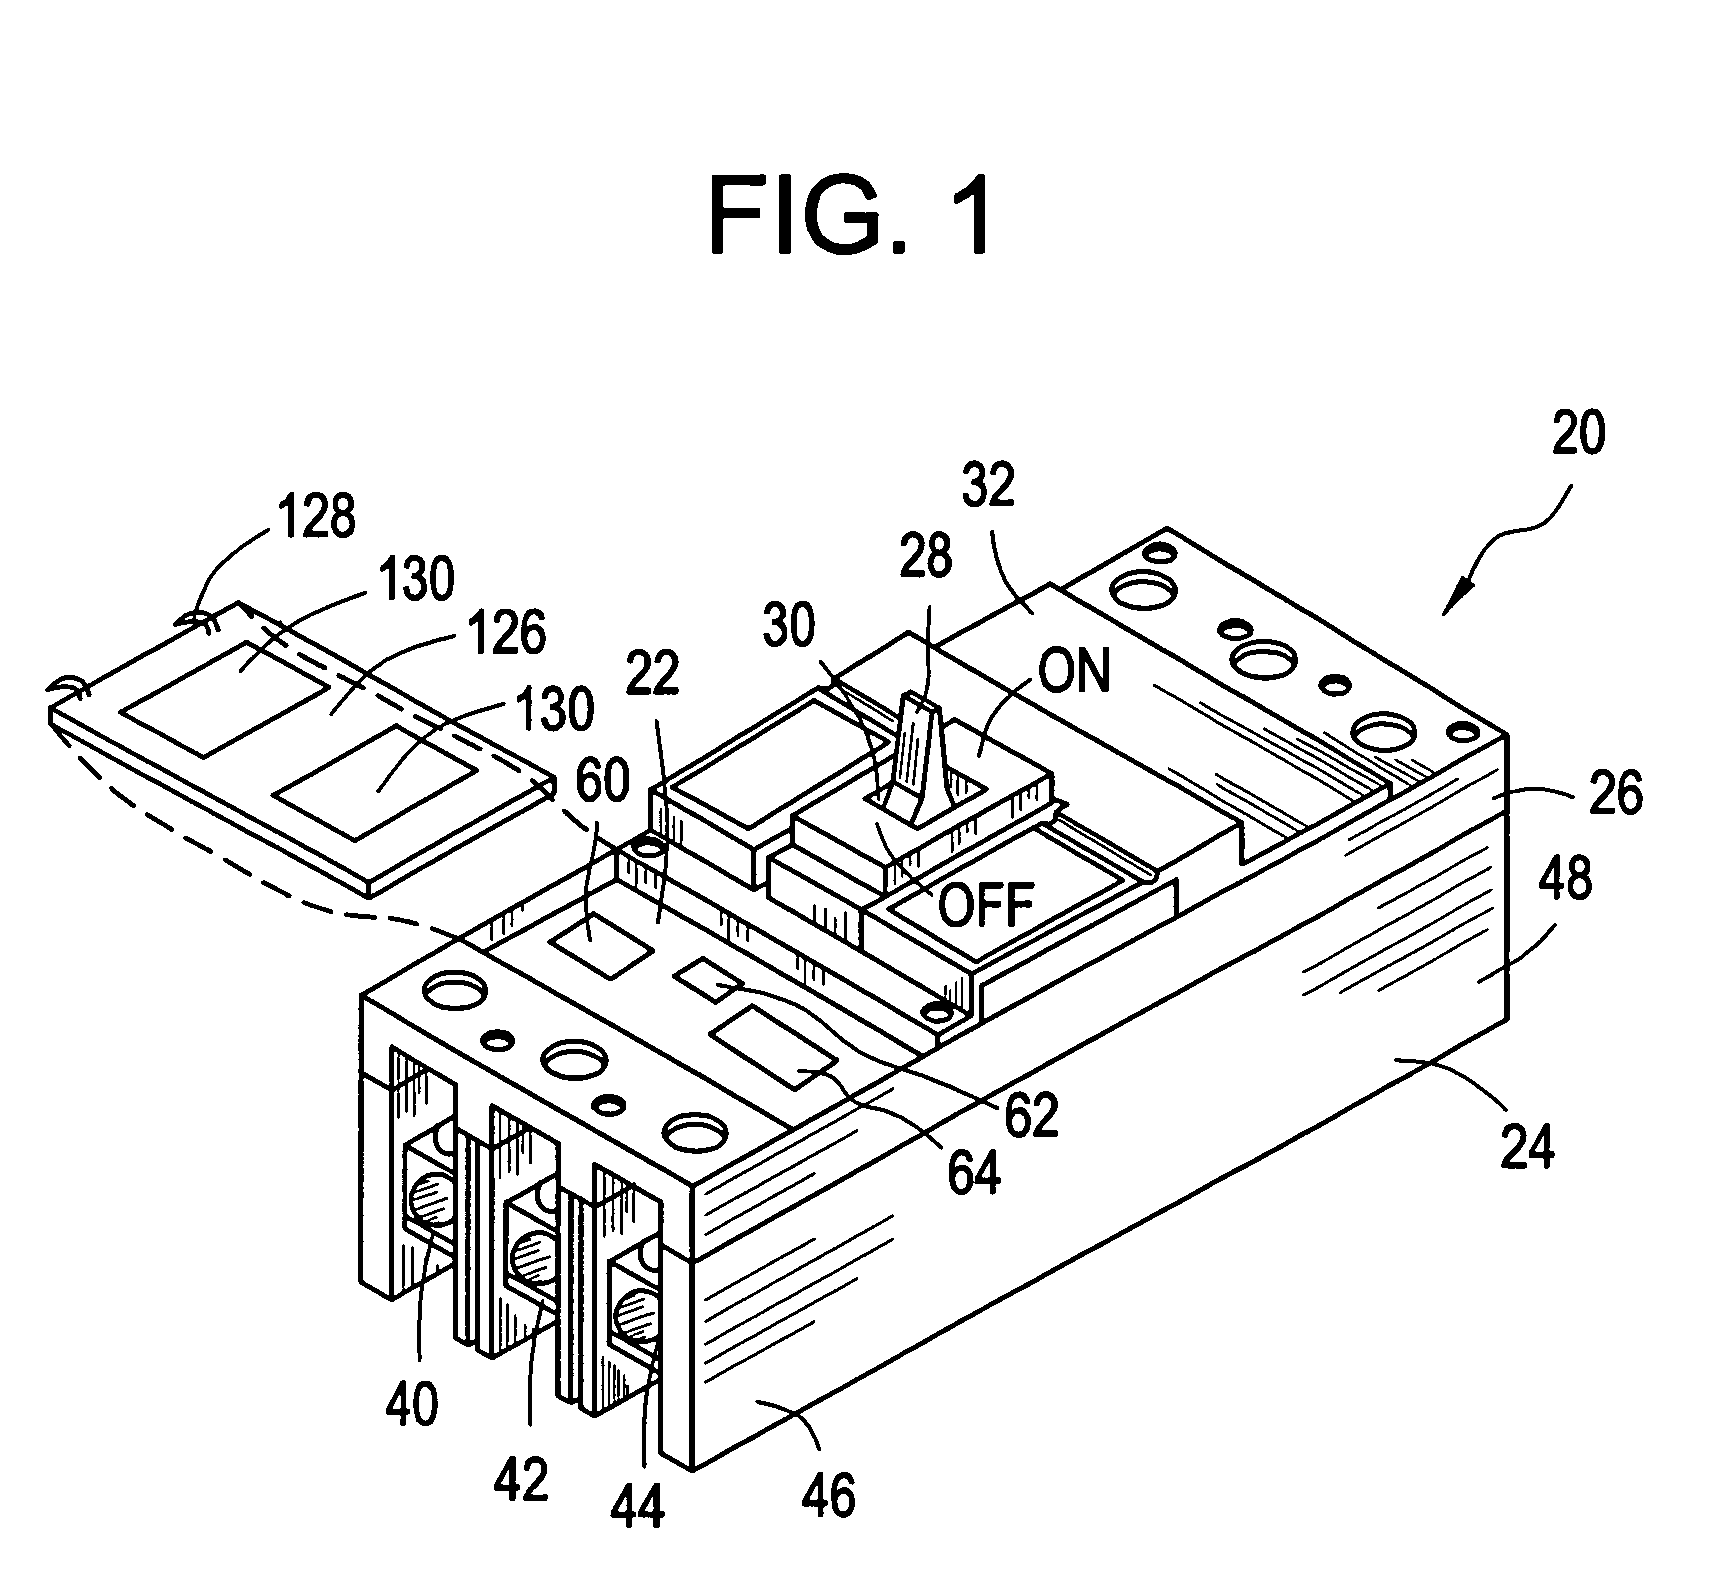 Method and apparatus for accessing and activating accessory functions of electronic circuit breakers